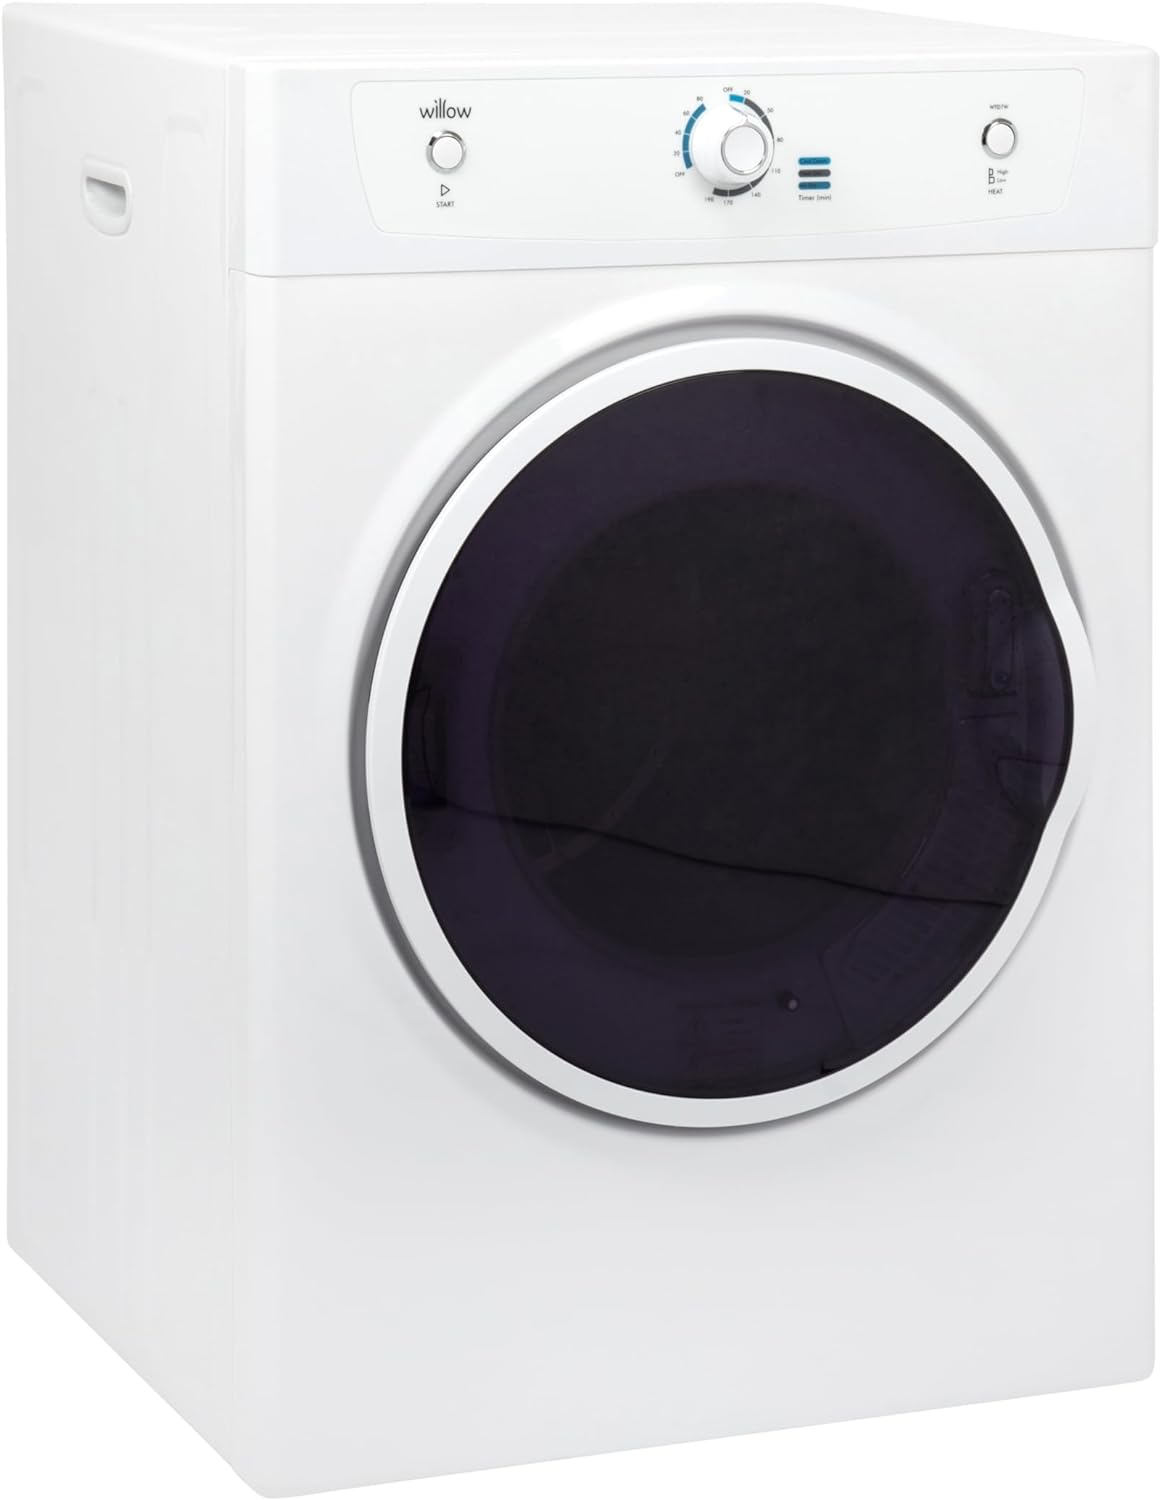 Willow WTD7W 7kg Vented Dryer, Front Loading with Child Lock, 3 Temperatures, Mehanical Controls, Crease Guard, 2 Year Warranty - White - Amazing Gadgets Outlet